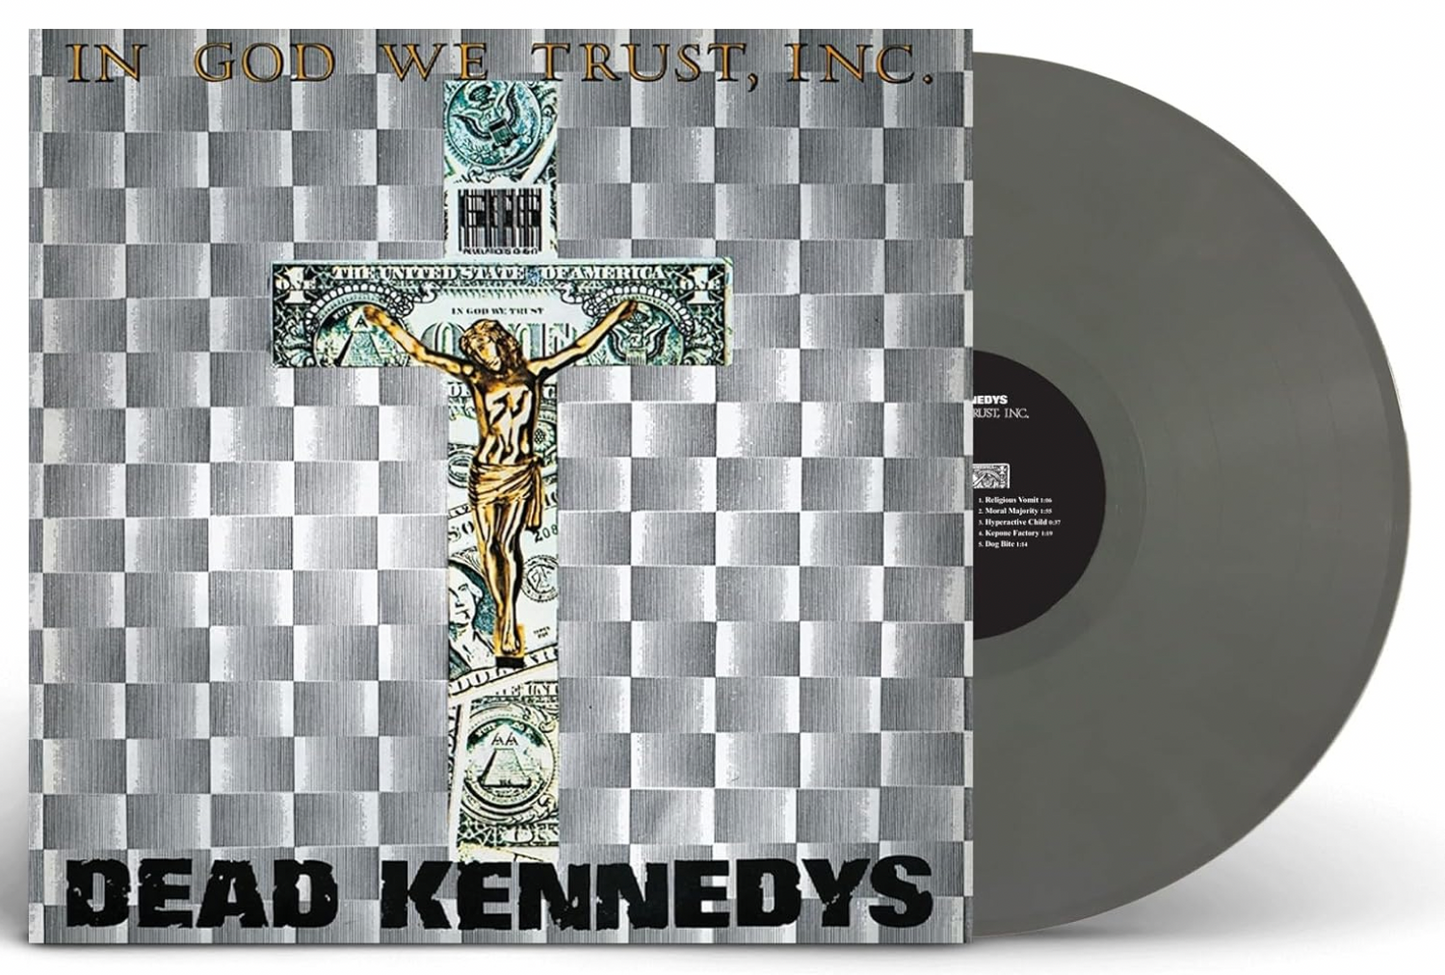 Dead Kennedys 'In God We Trust, Inc' 12" EP